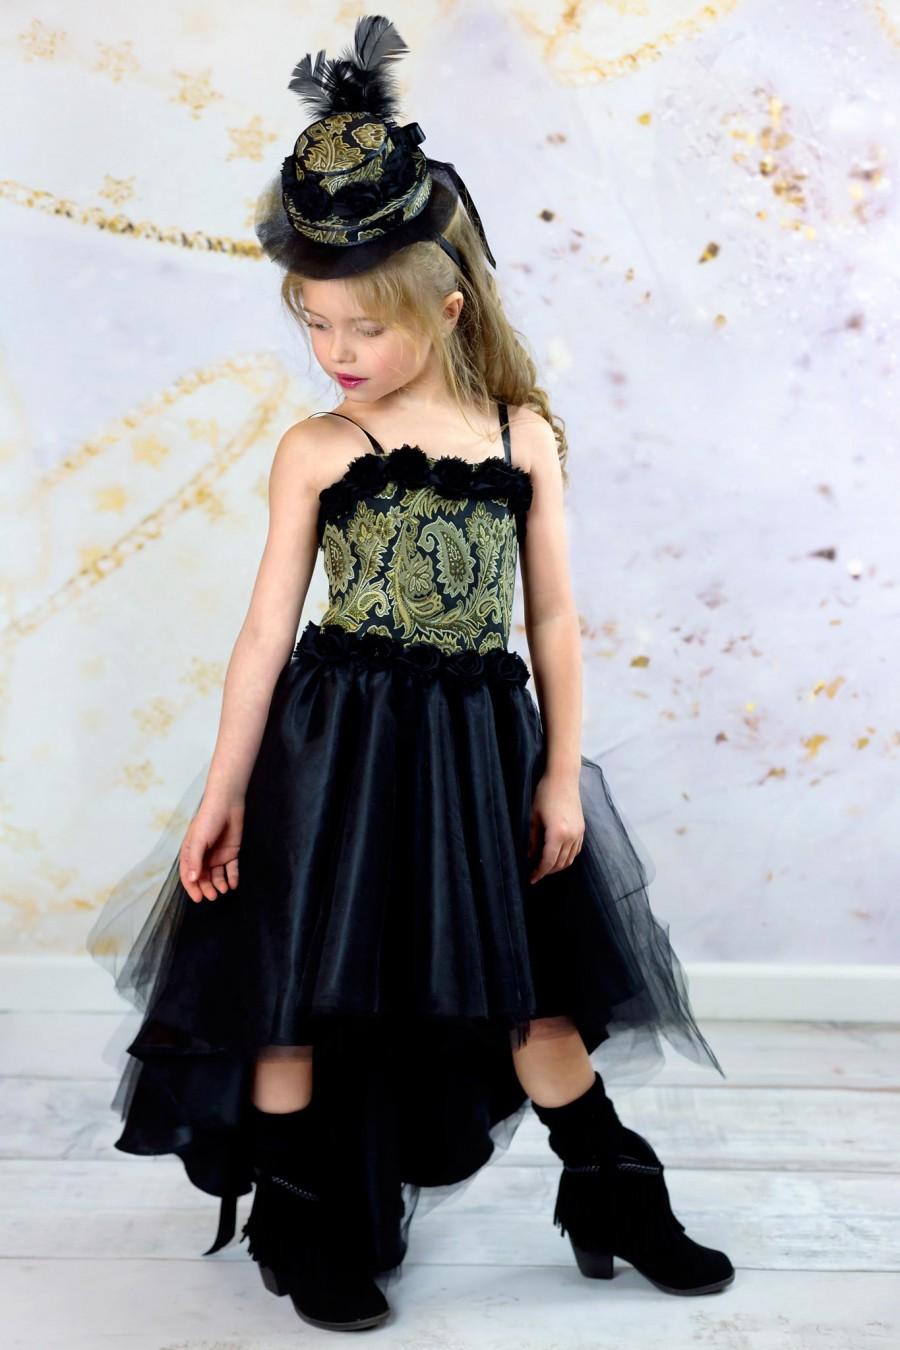 Wedding - Girls Haute Couture Dress - Black and Gold Corset Dress - Pageant Gown - High Low Party Dress - Fascinator Hat - Flower Girl Dress 3t to 10